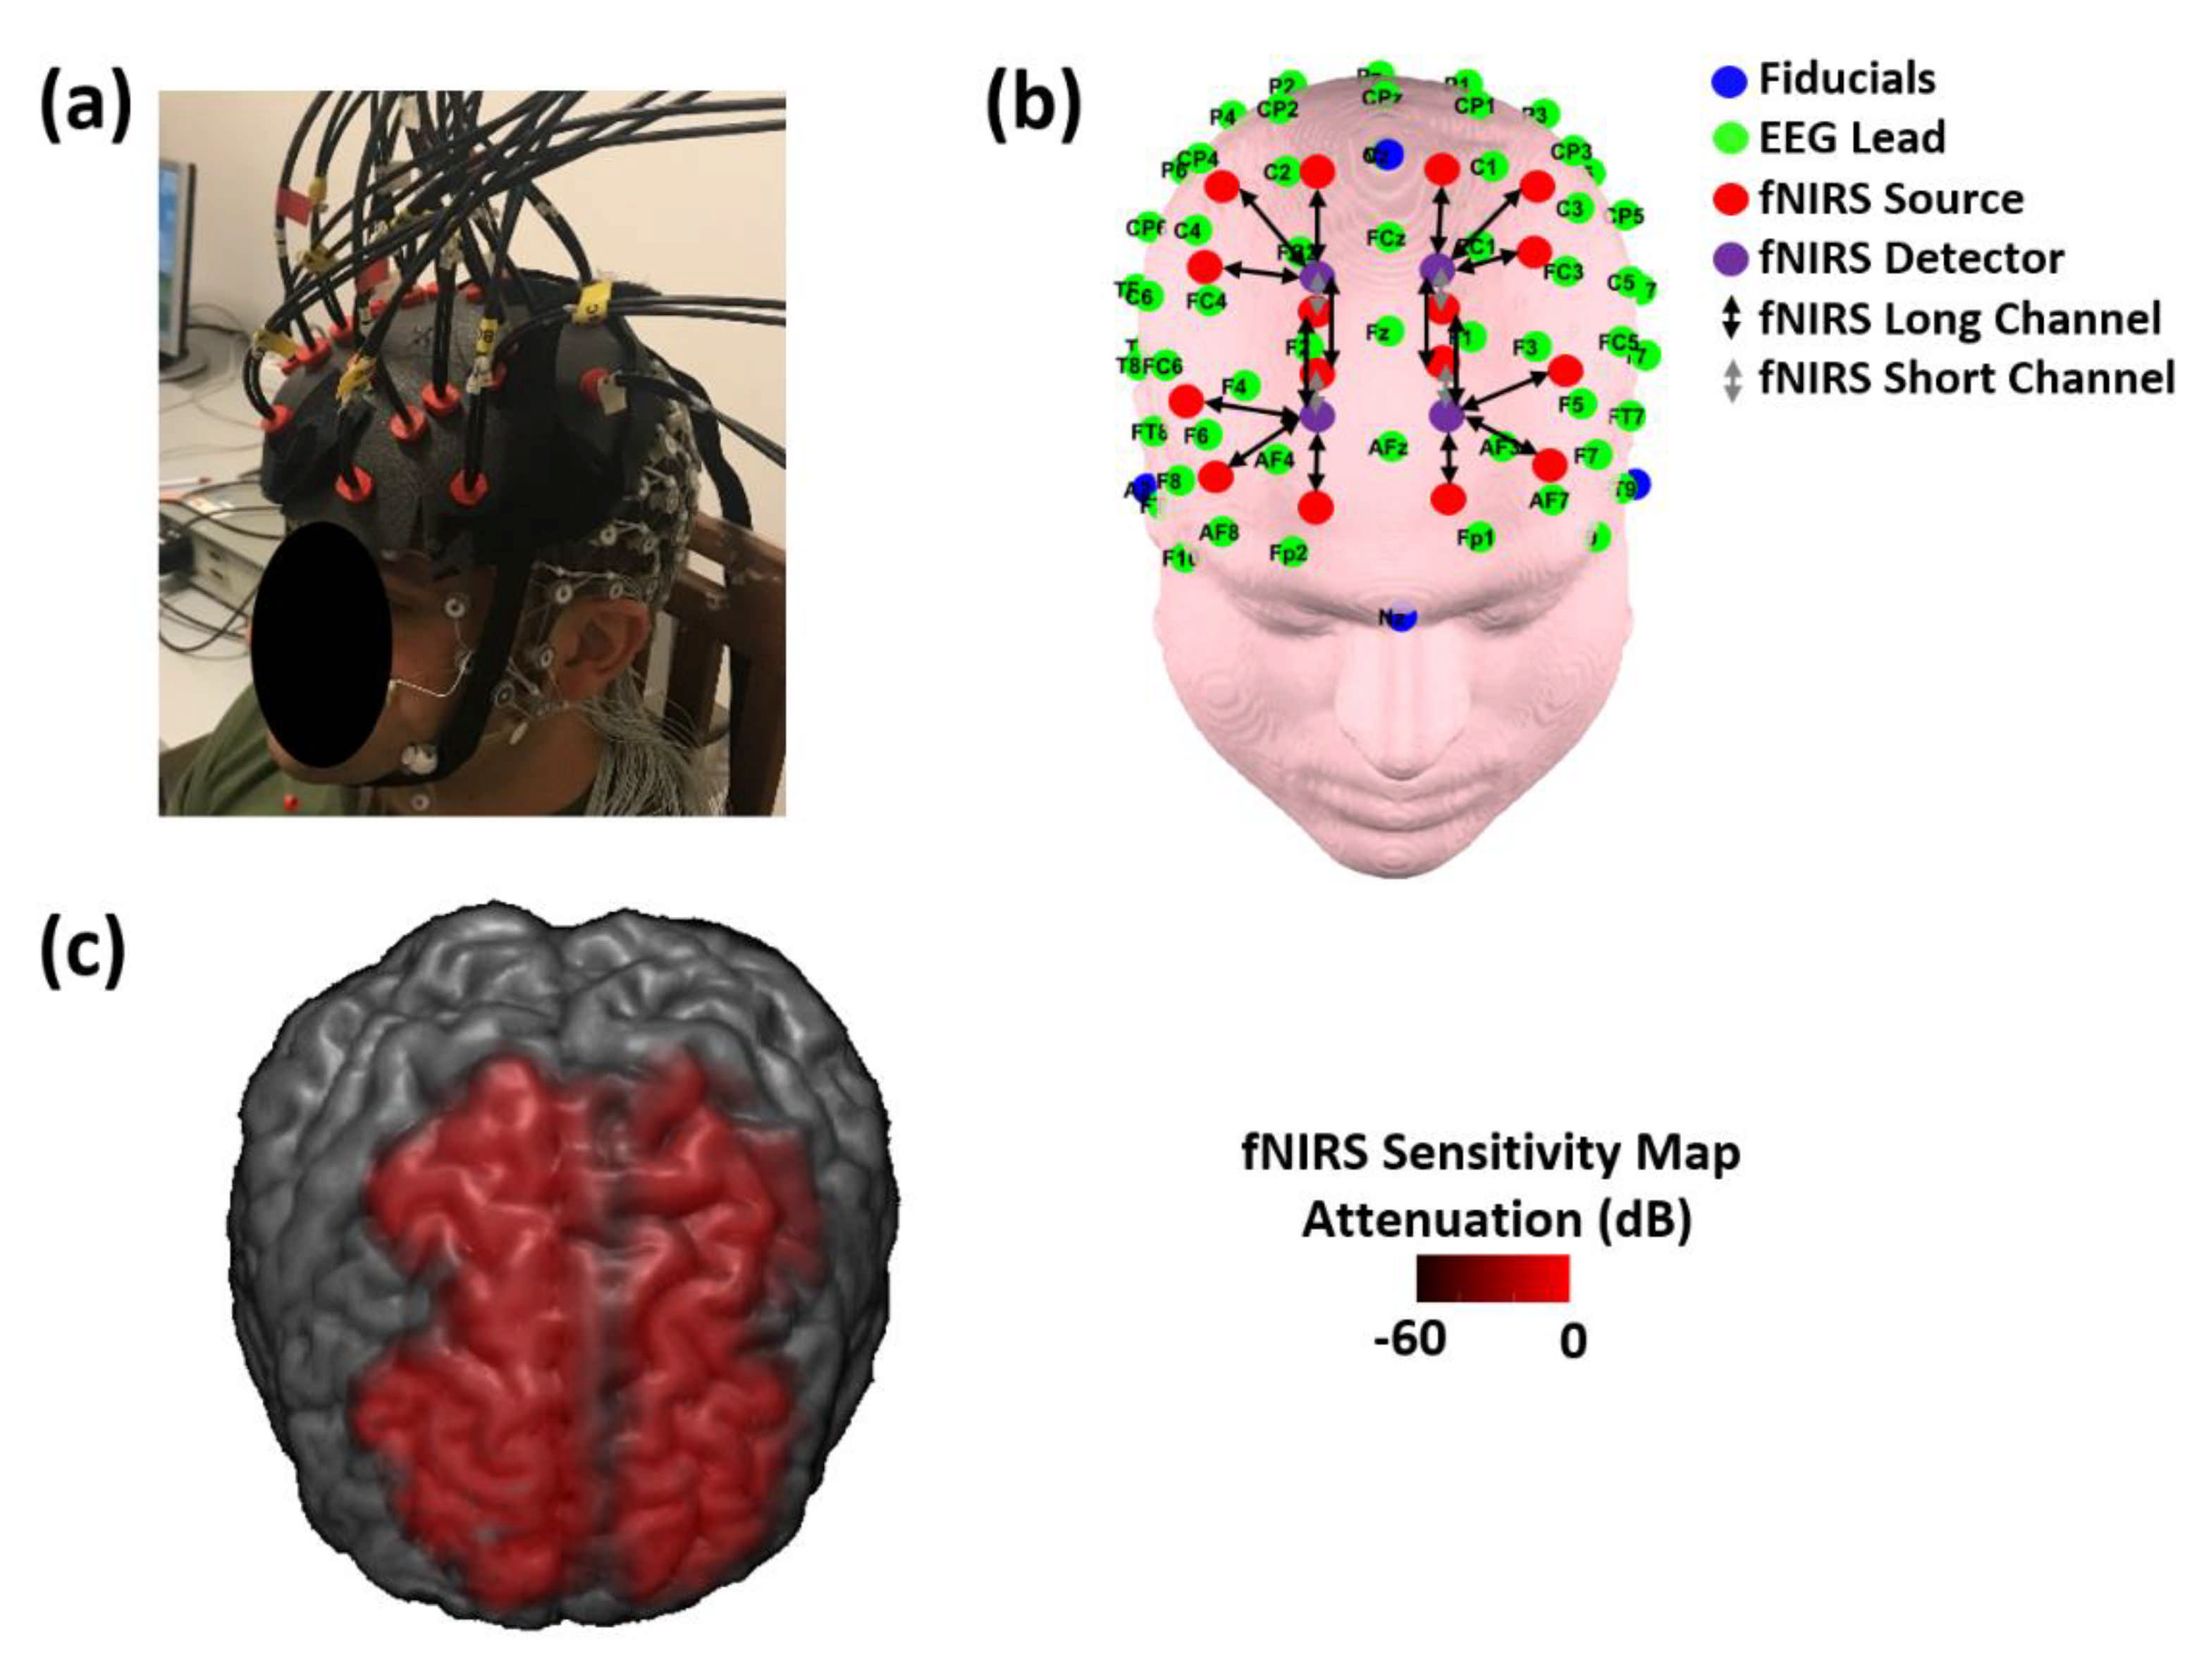 Biomedicines | Free Full-Text | Evidence of Neurovascular Un-Coupling in  Mild Alzheimer's Disease through Multimodal EEG-fNIRS and Multivariate  Analysis of Resting-State Data | HTML